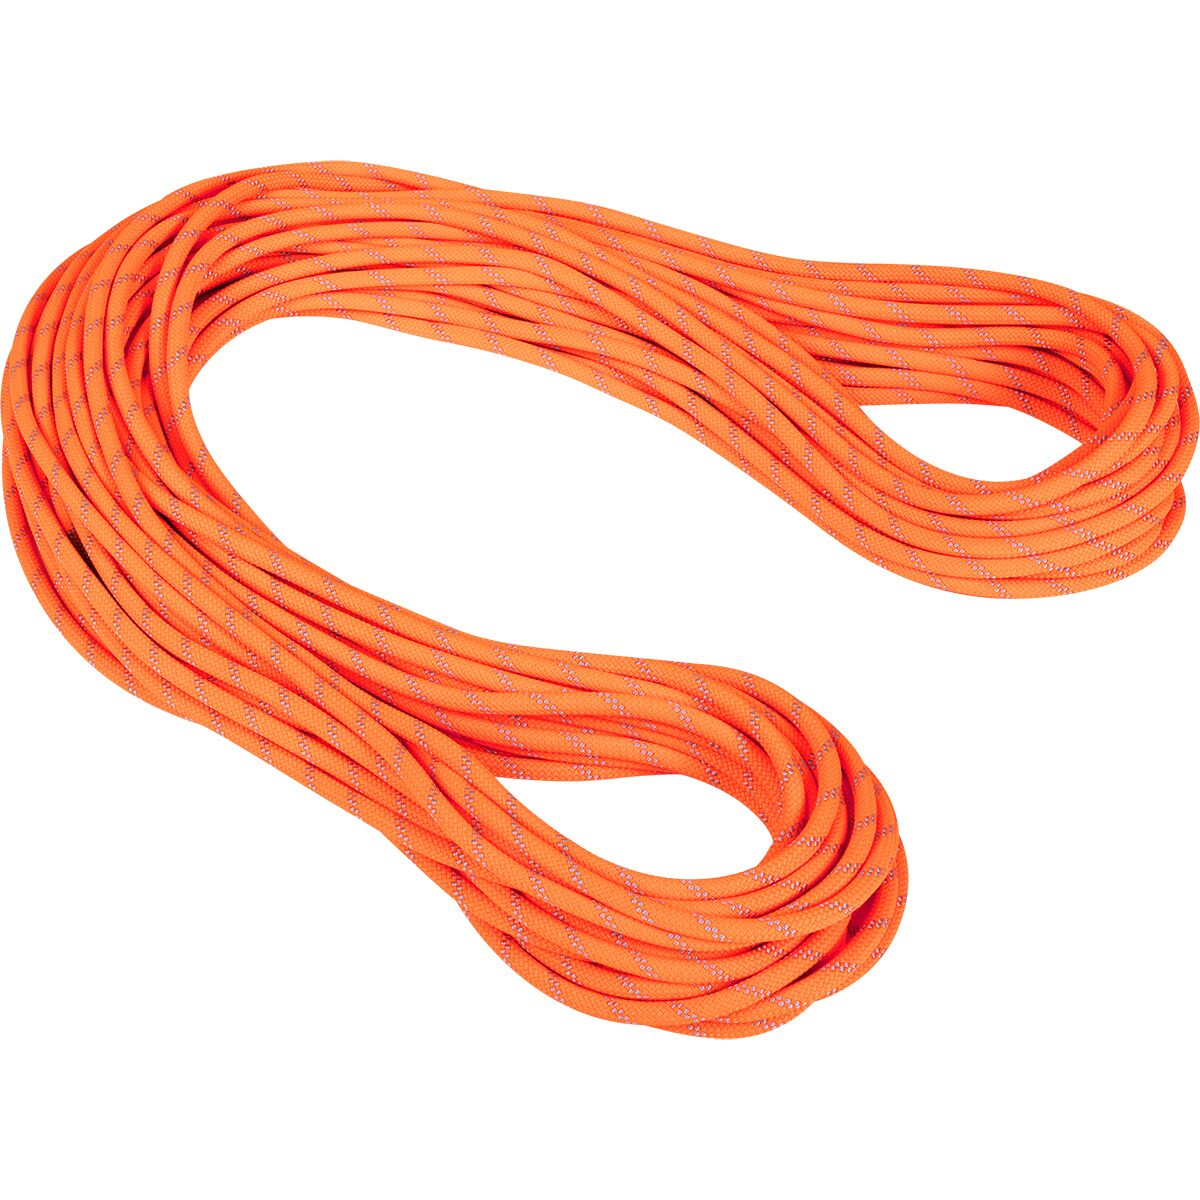 Photos - Outdoor Furniture Mammut Alpine Dry Rope - 9.5mm 